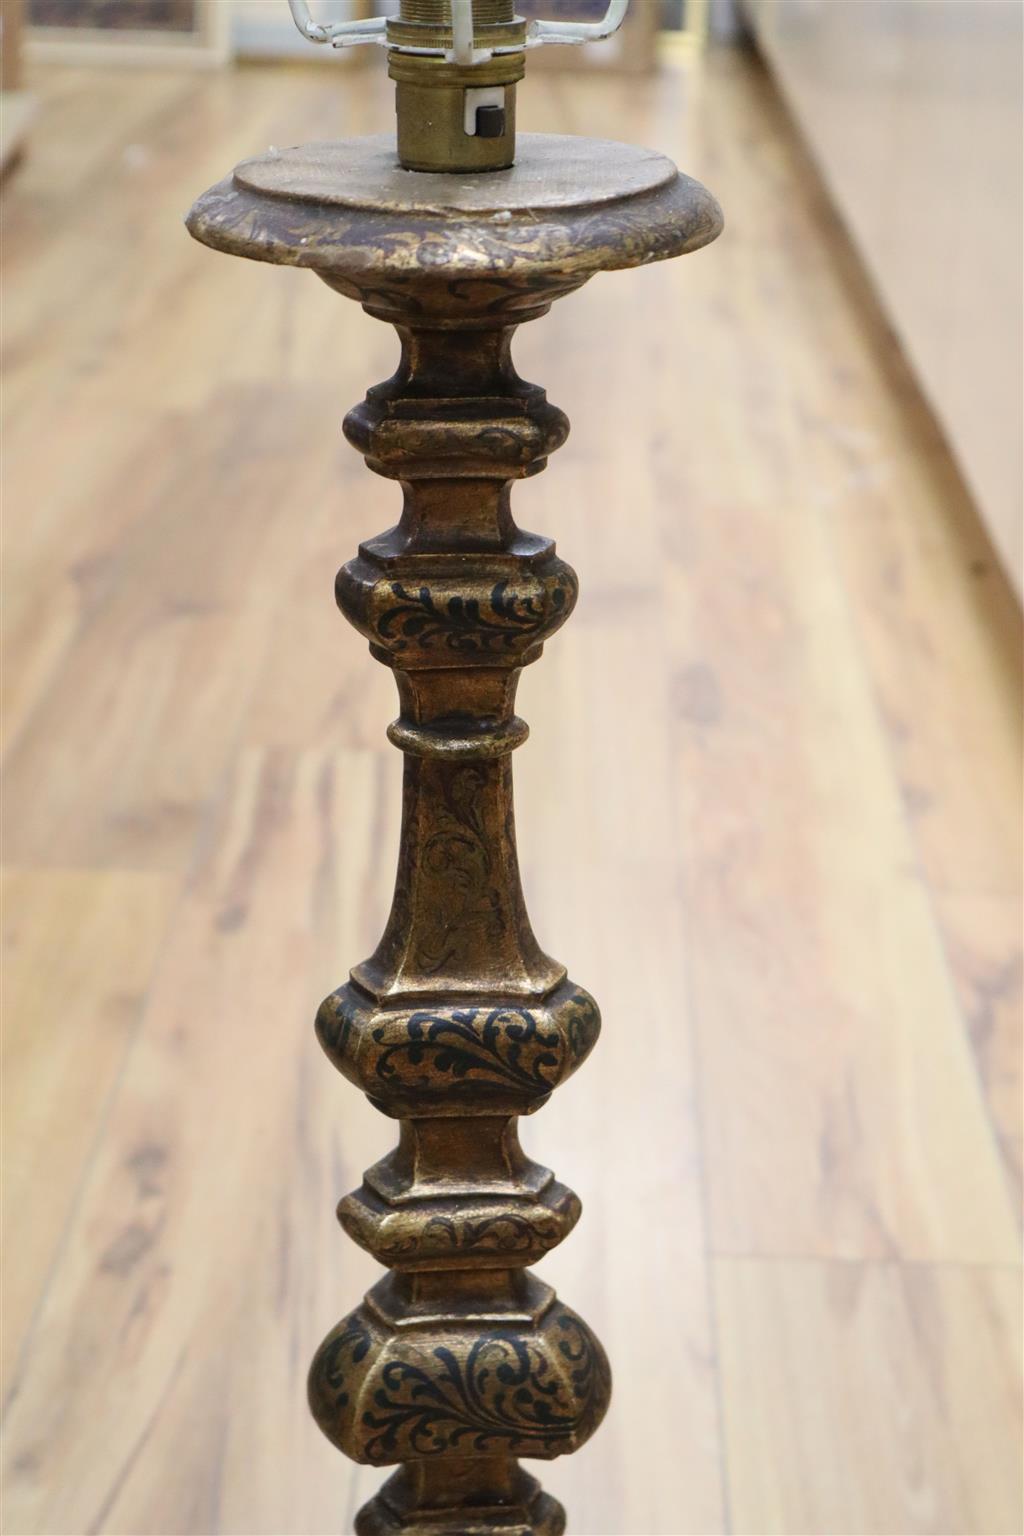 A Florentine green and gilt carved wood table lamp, height 63cm